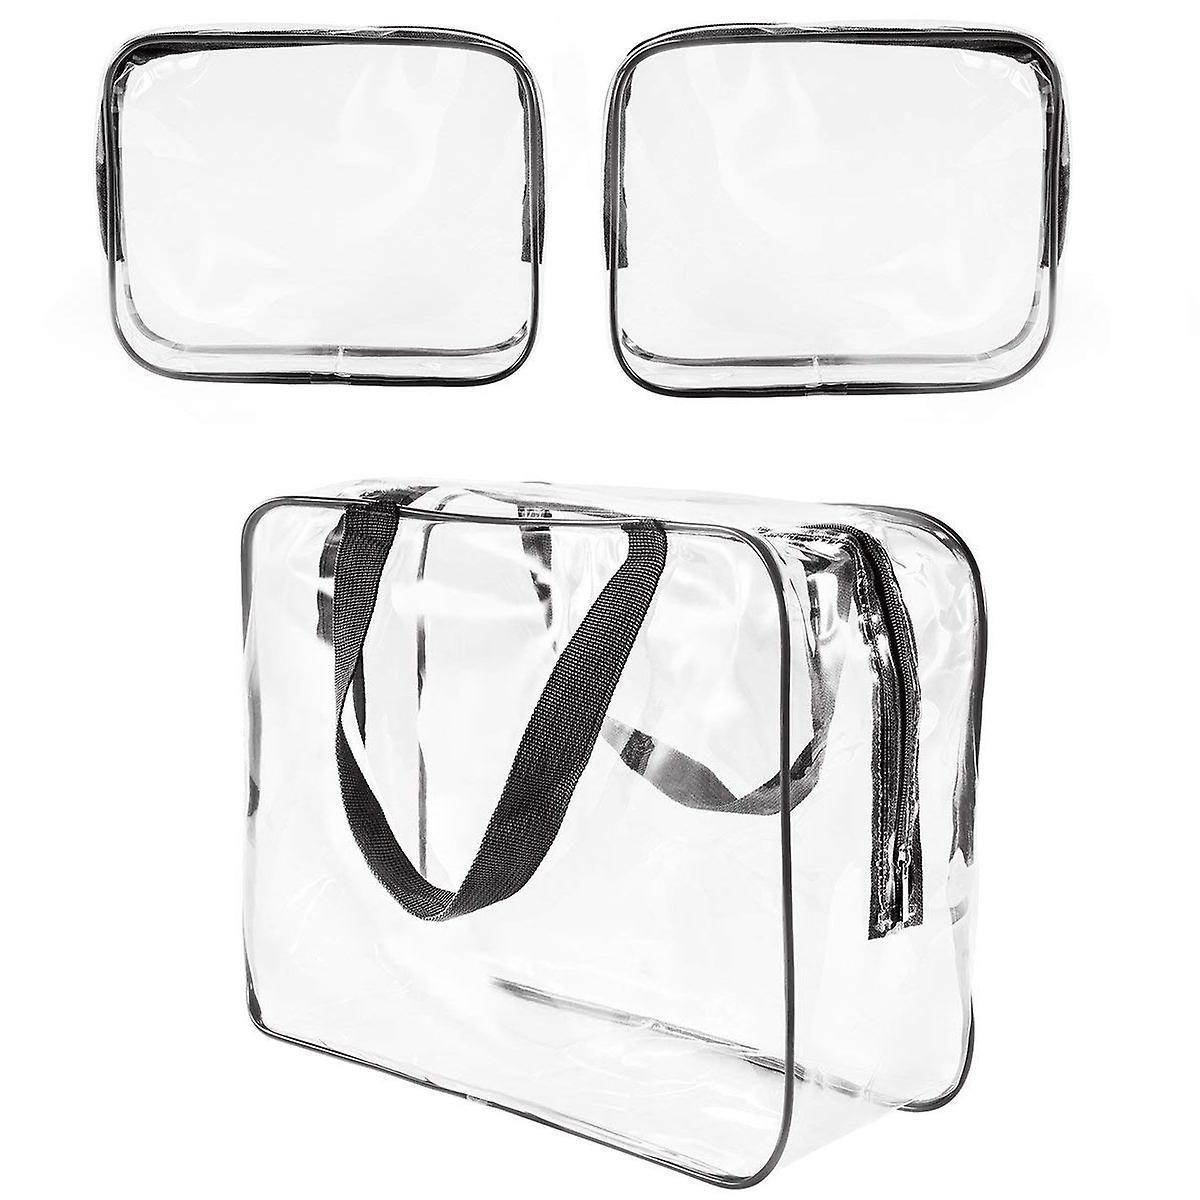 Clear Cosmetic Bag Air, Plastic Travel Toiletry Pouch Water Resistant Packing Cubes With Zipper Closure Carrying Handles For Women Men, Make-up Brus